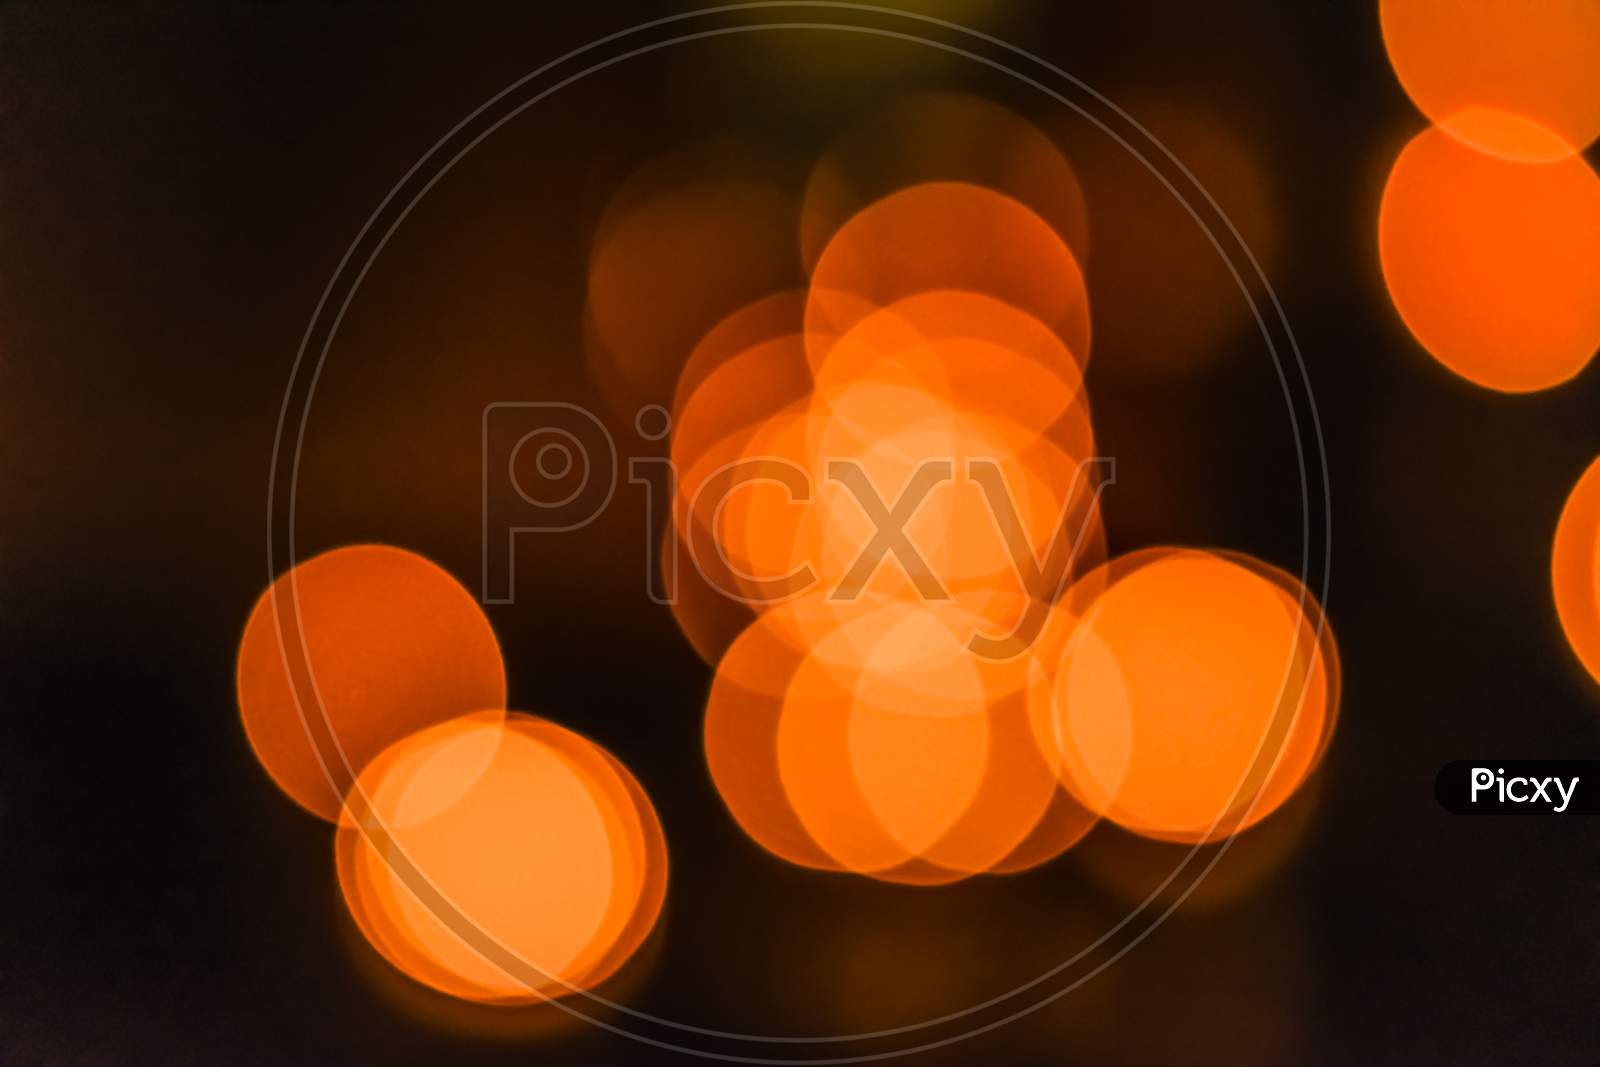 Landscape View Of Out Of Focus Yellow, Orange Light Bokeh Wallpaper Or Background For Texts, Images And Articles, Blank Space With Blurred Background.Large Golden Bokeh.